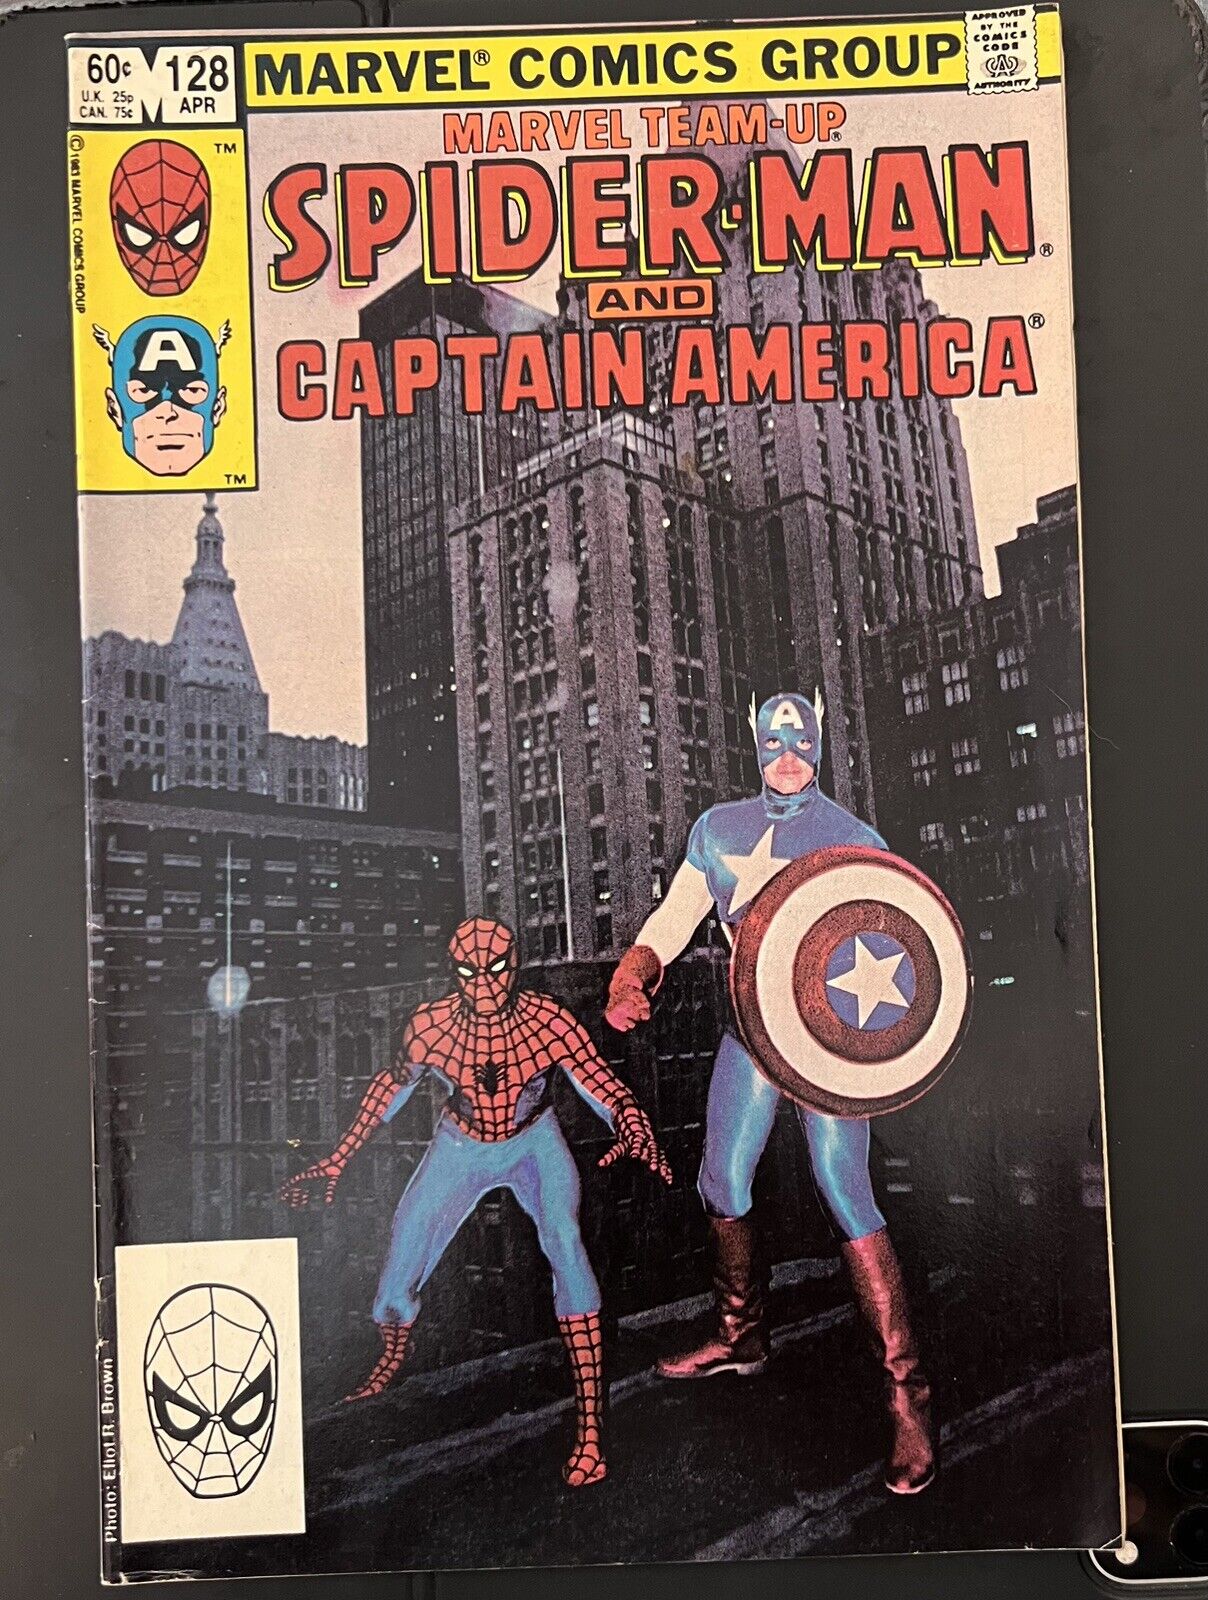 MARVEL TEAM-UP #128 1983 SPIDER-MAN & CAPTAIN AMERICA PHOTO COVER VERY GOOD